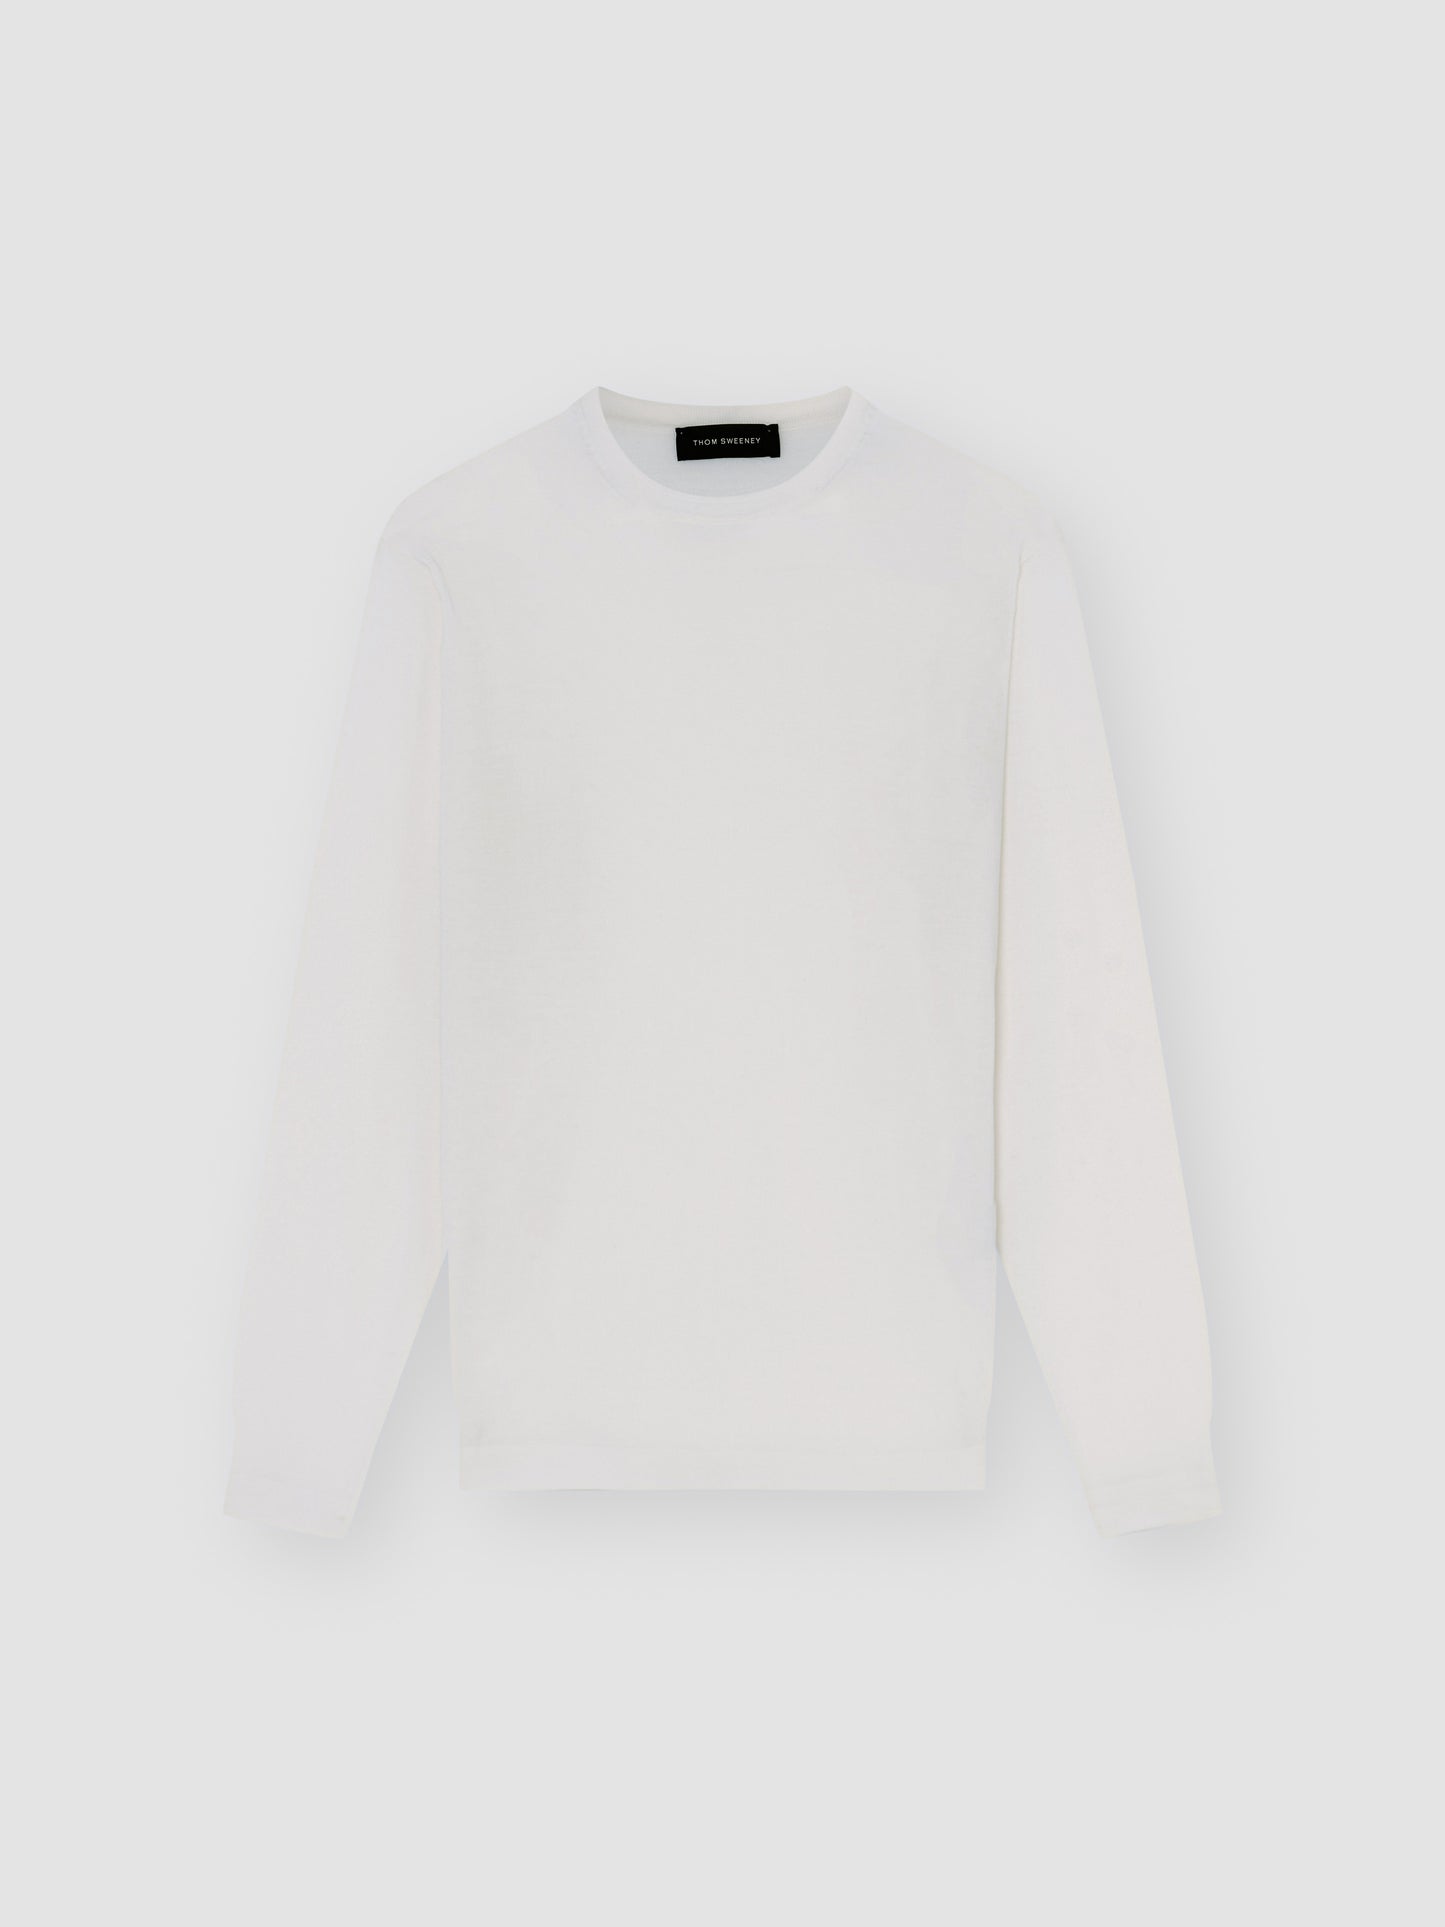 Wool Long Sleeve relaxed Fit T-Shirt Off White Product Image